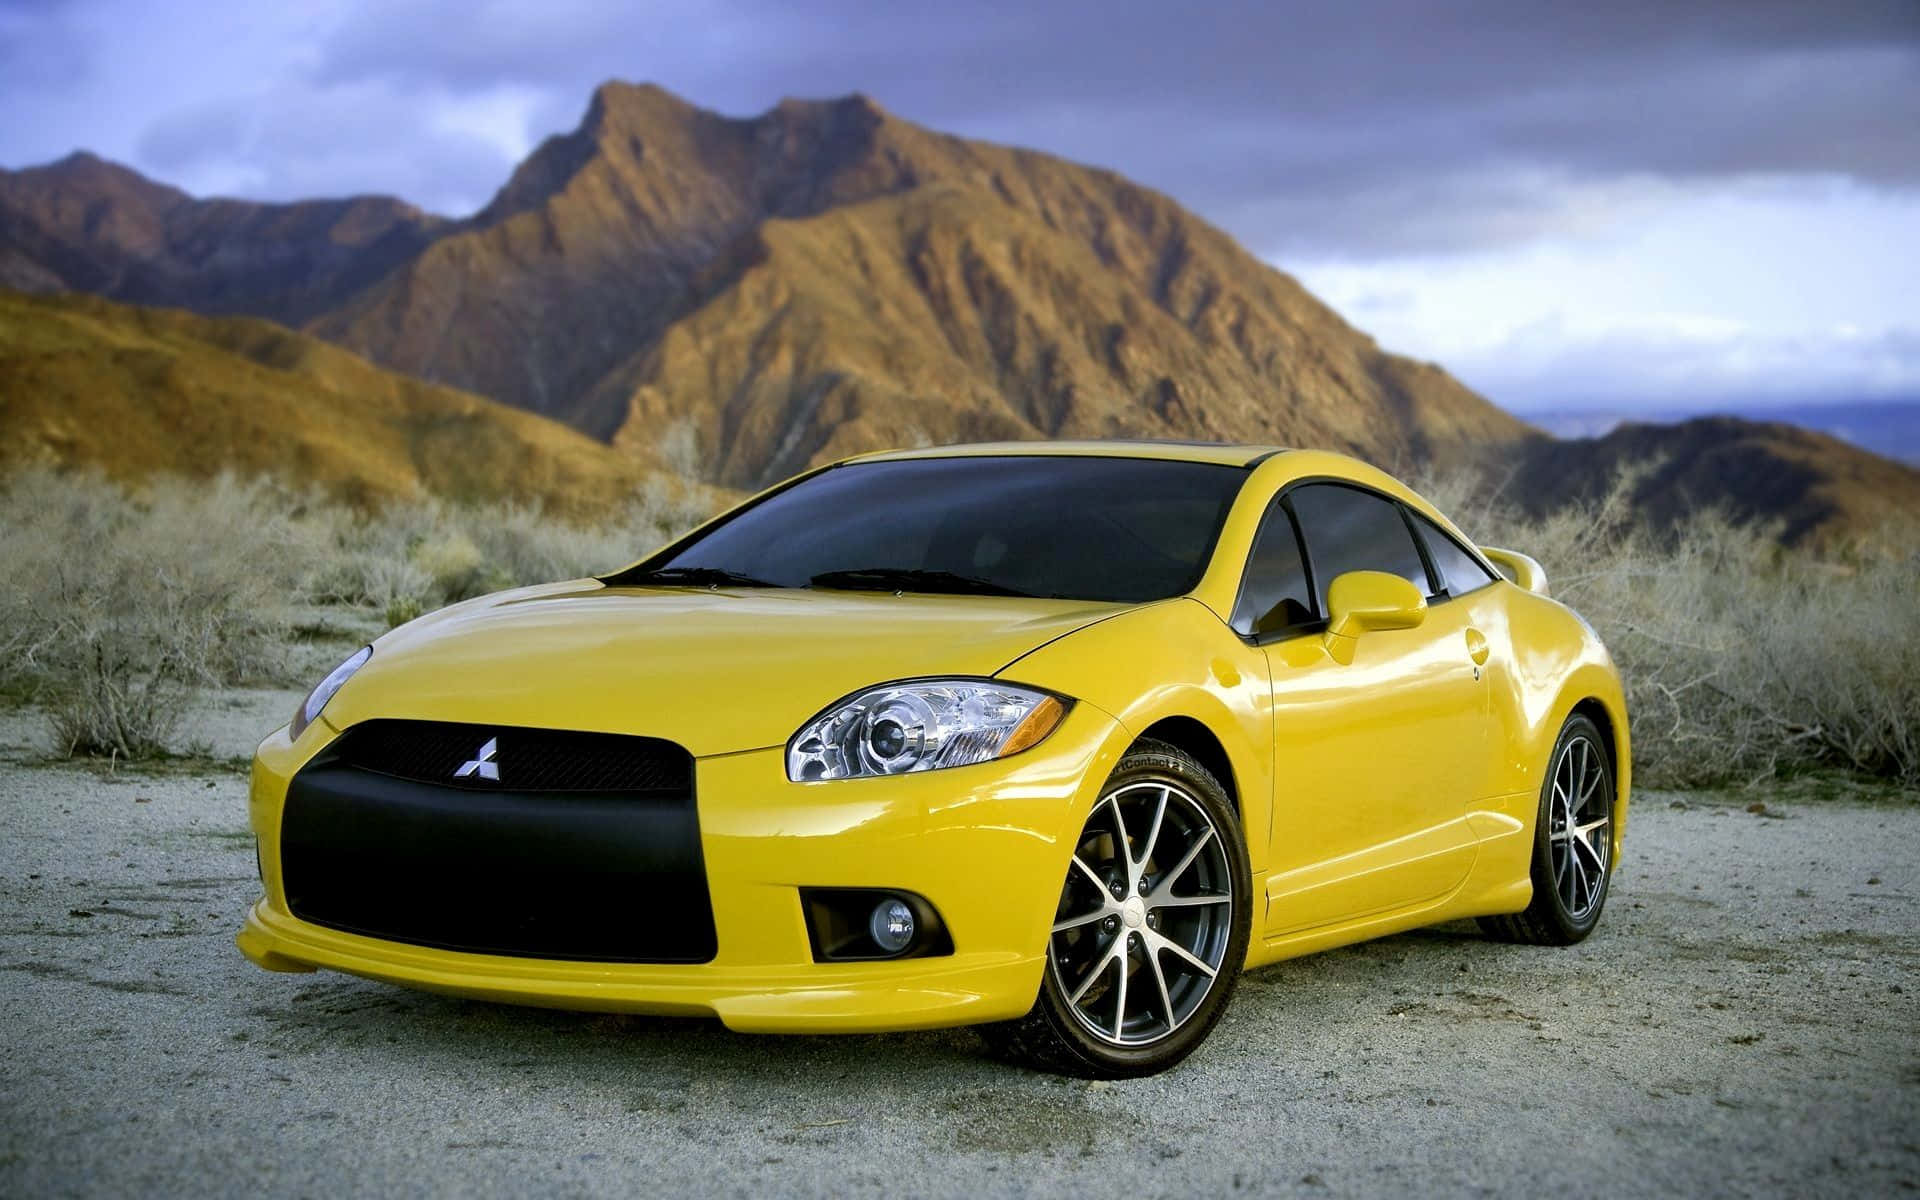 Captivating Yellow Car on a Scenic Road Wallpaper